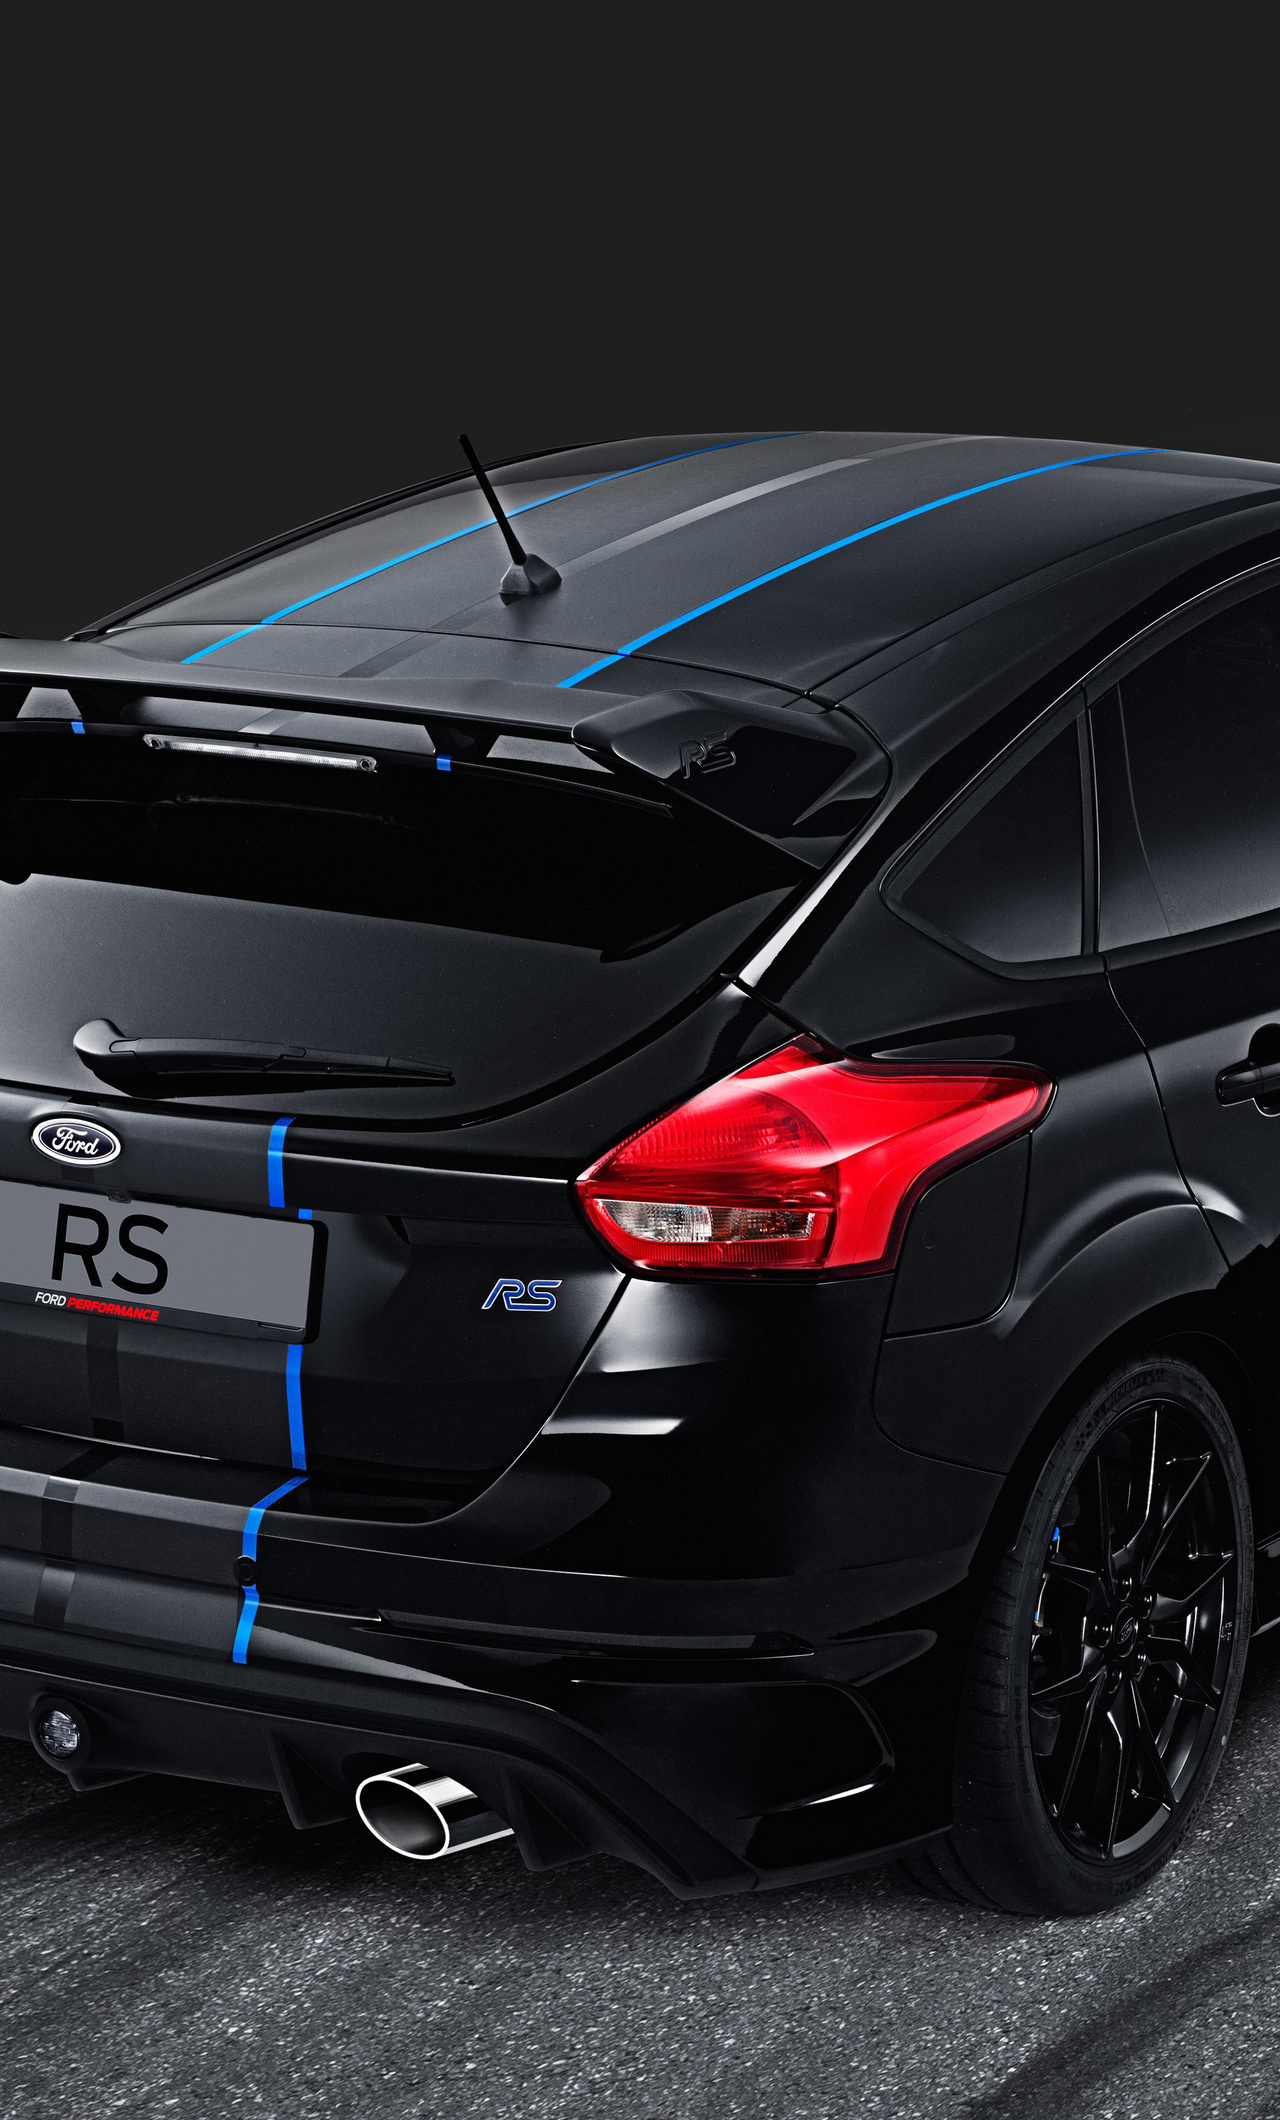 Ford Focus: RS Performance, The Mk 2, codenamed C307, used the C1 platform. 1280x2120 HD Wallpaper.